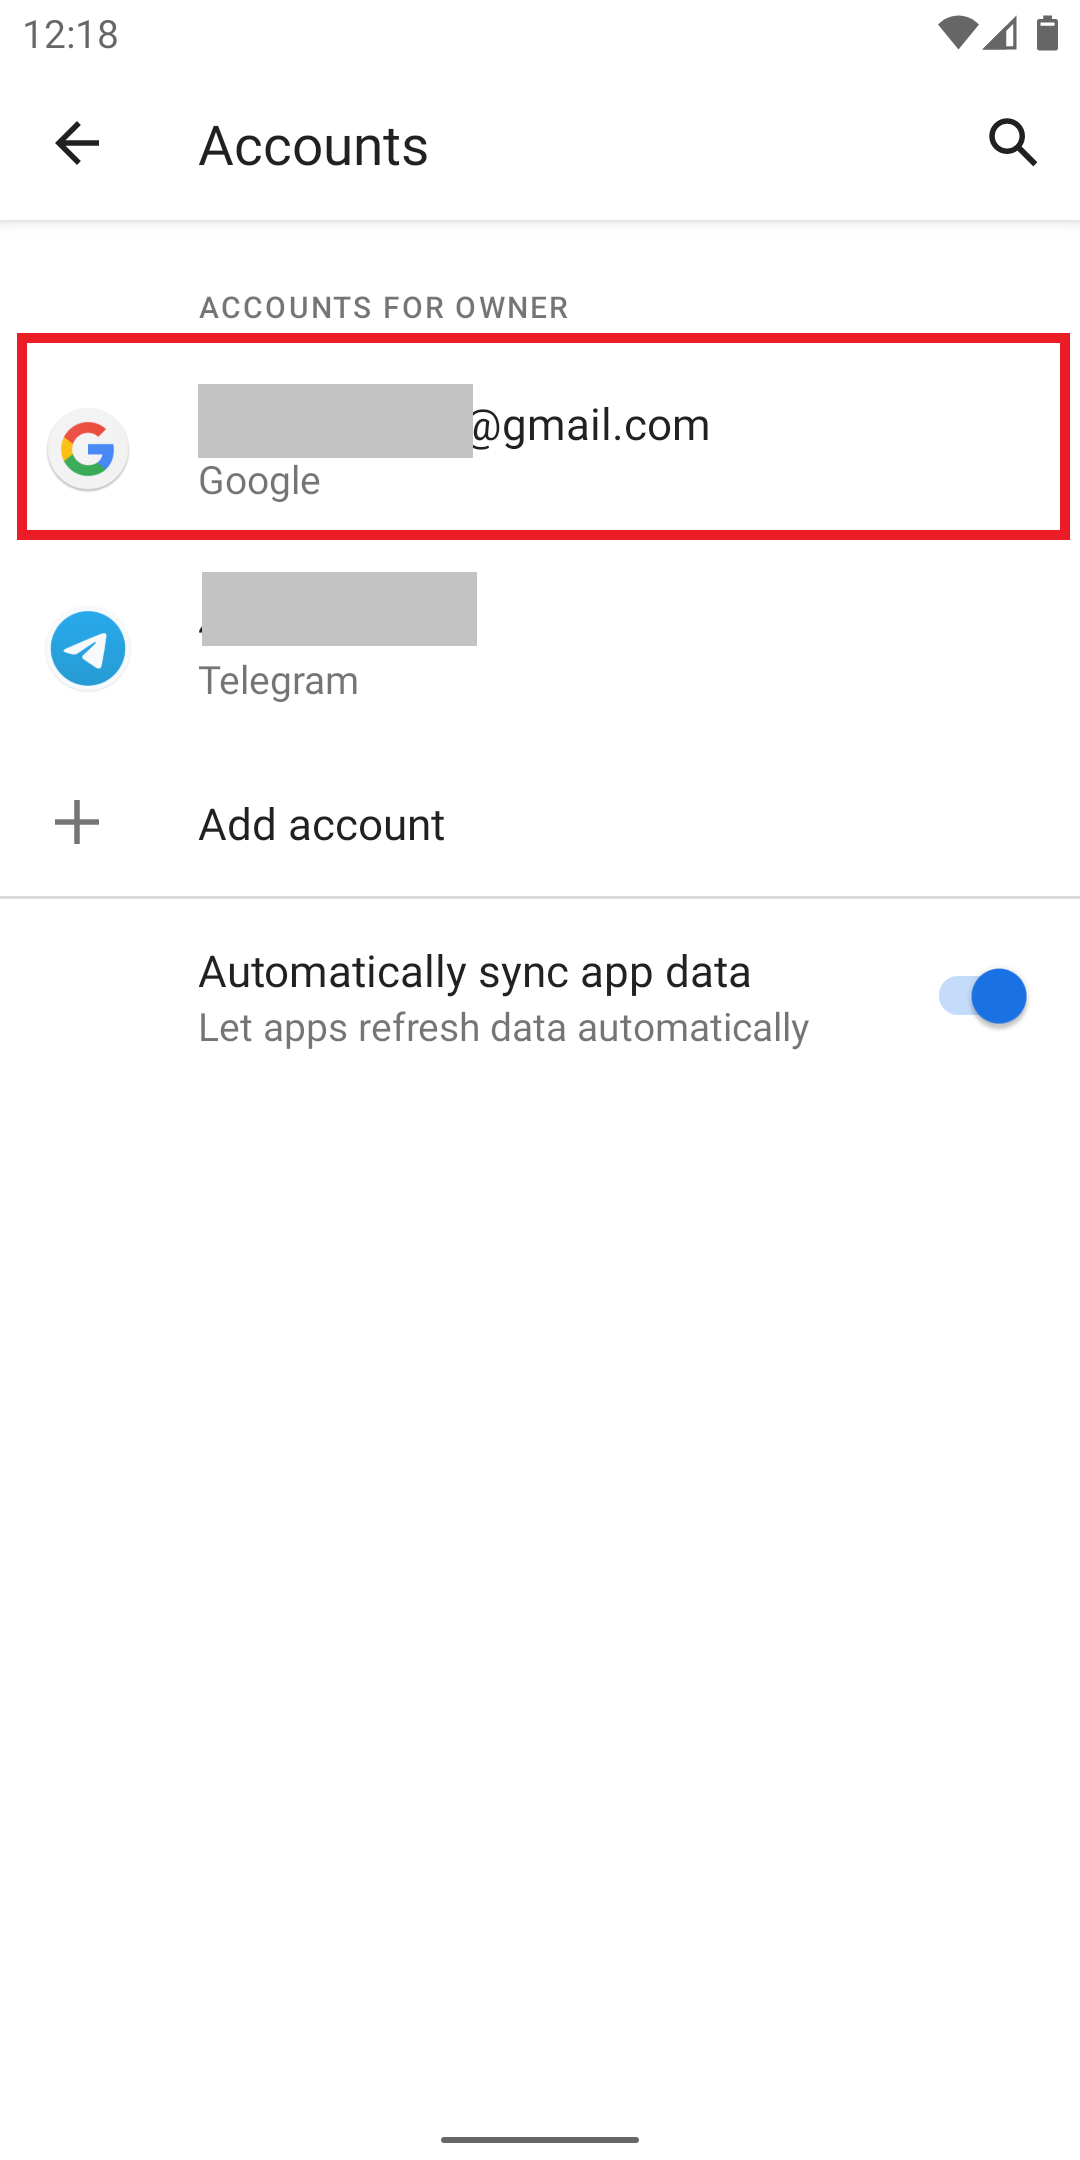 Remove Google Account On Android